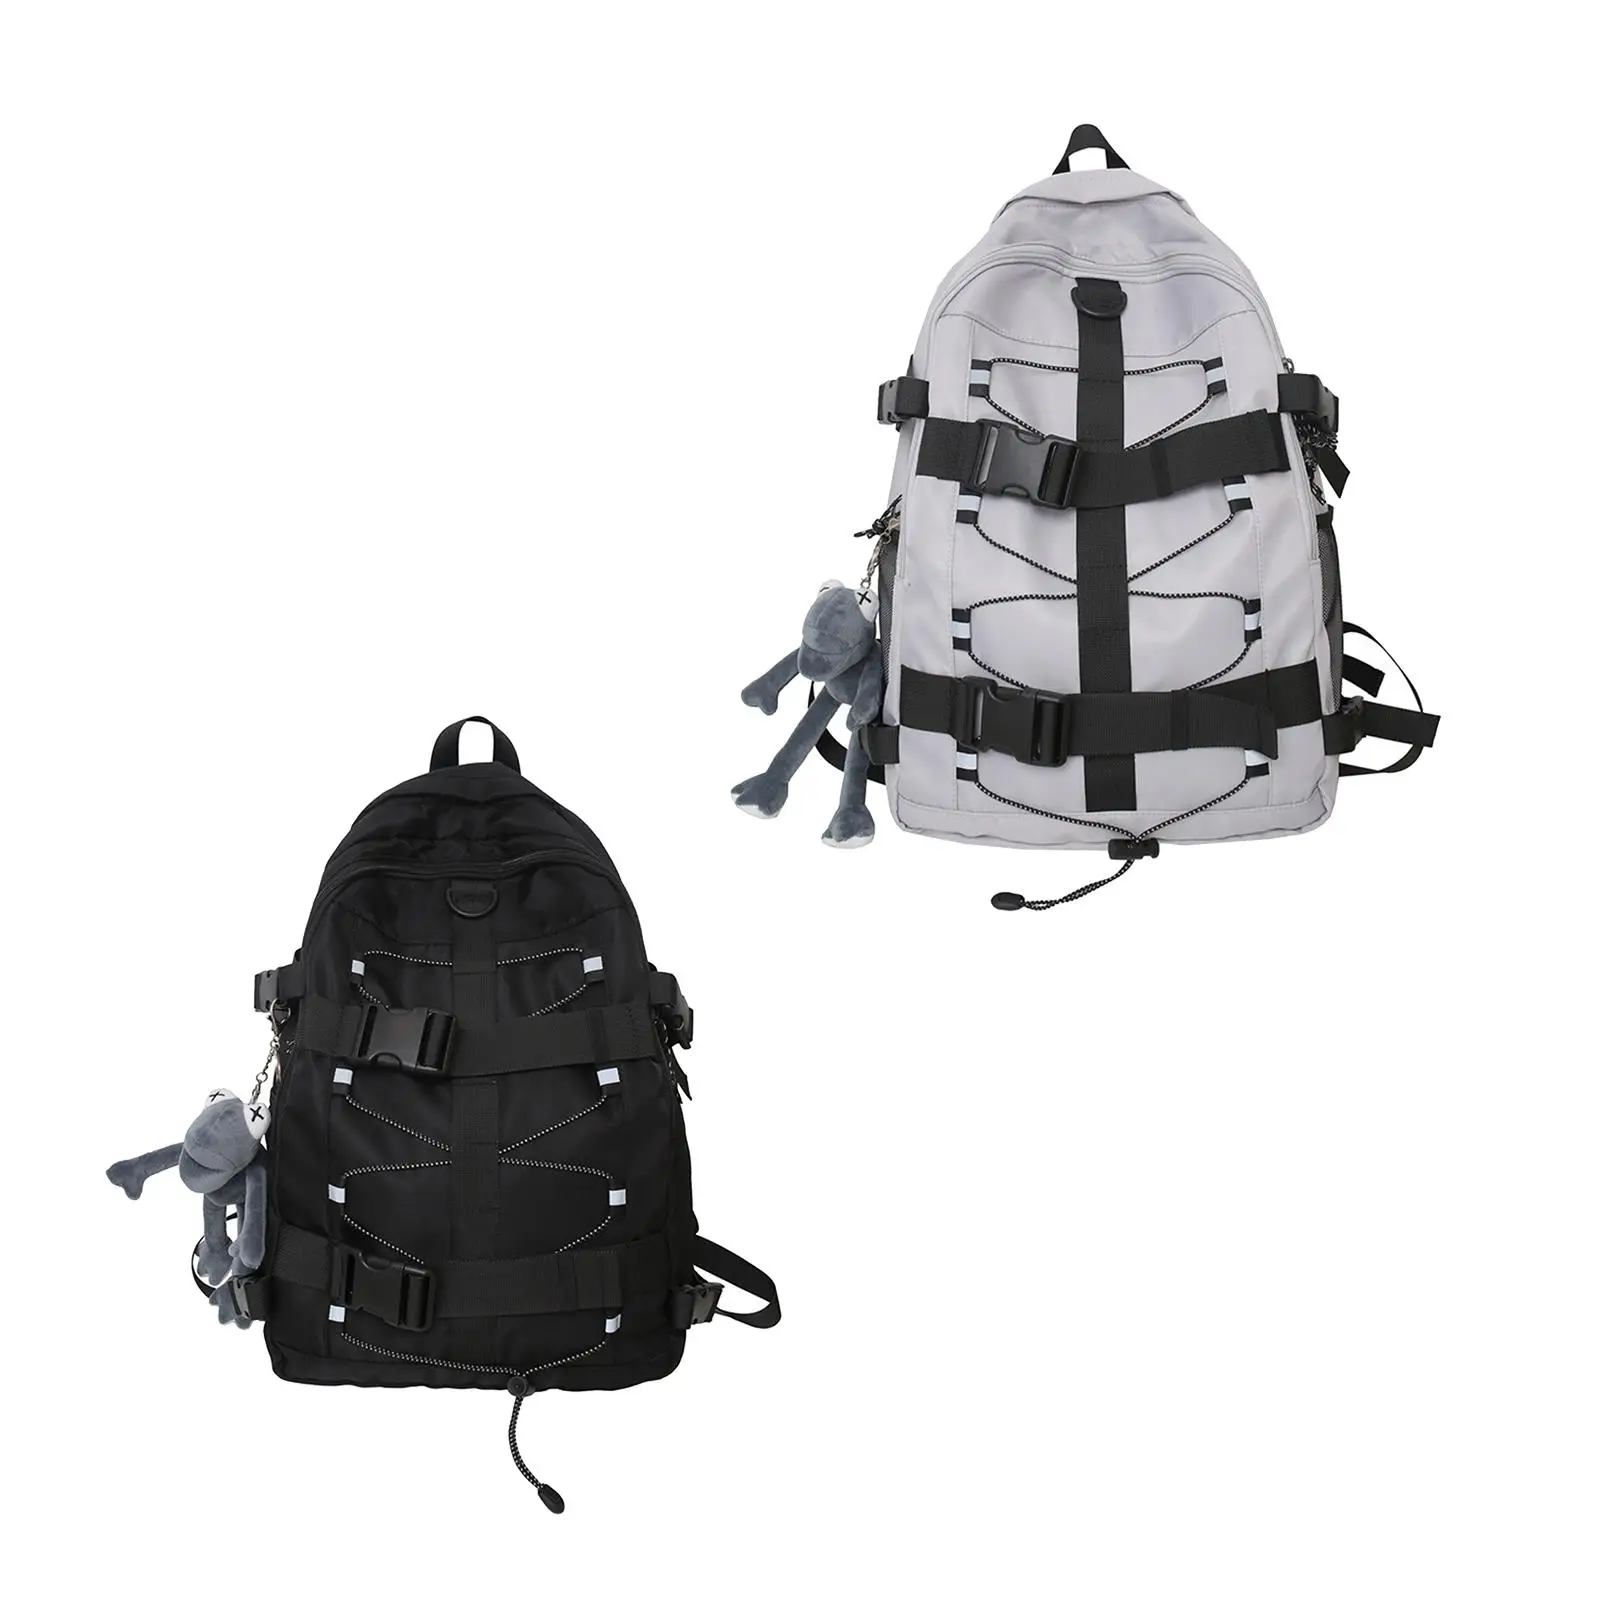 Backpack Large Capacity Premium Adjustable Straps Rucksack with Zipper Male Travel Bags for Outdoor Climbing Adults Unisex